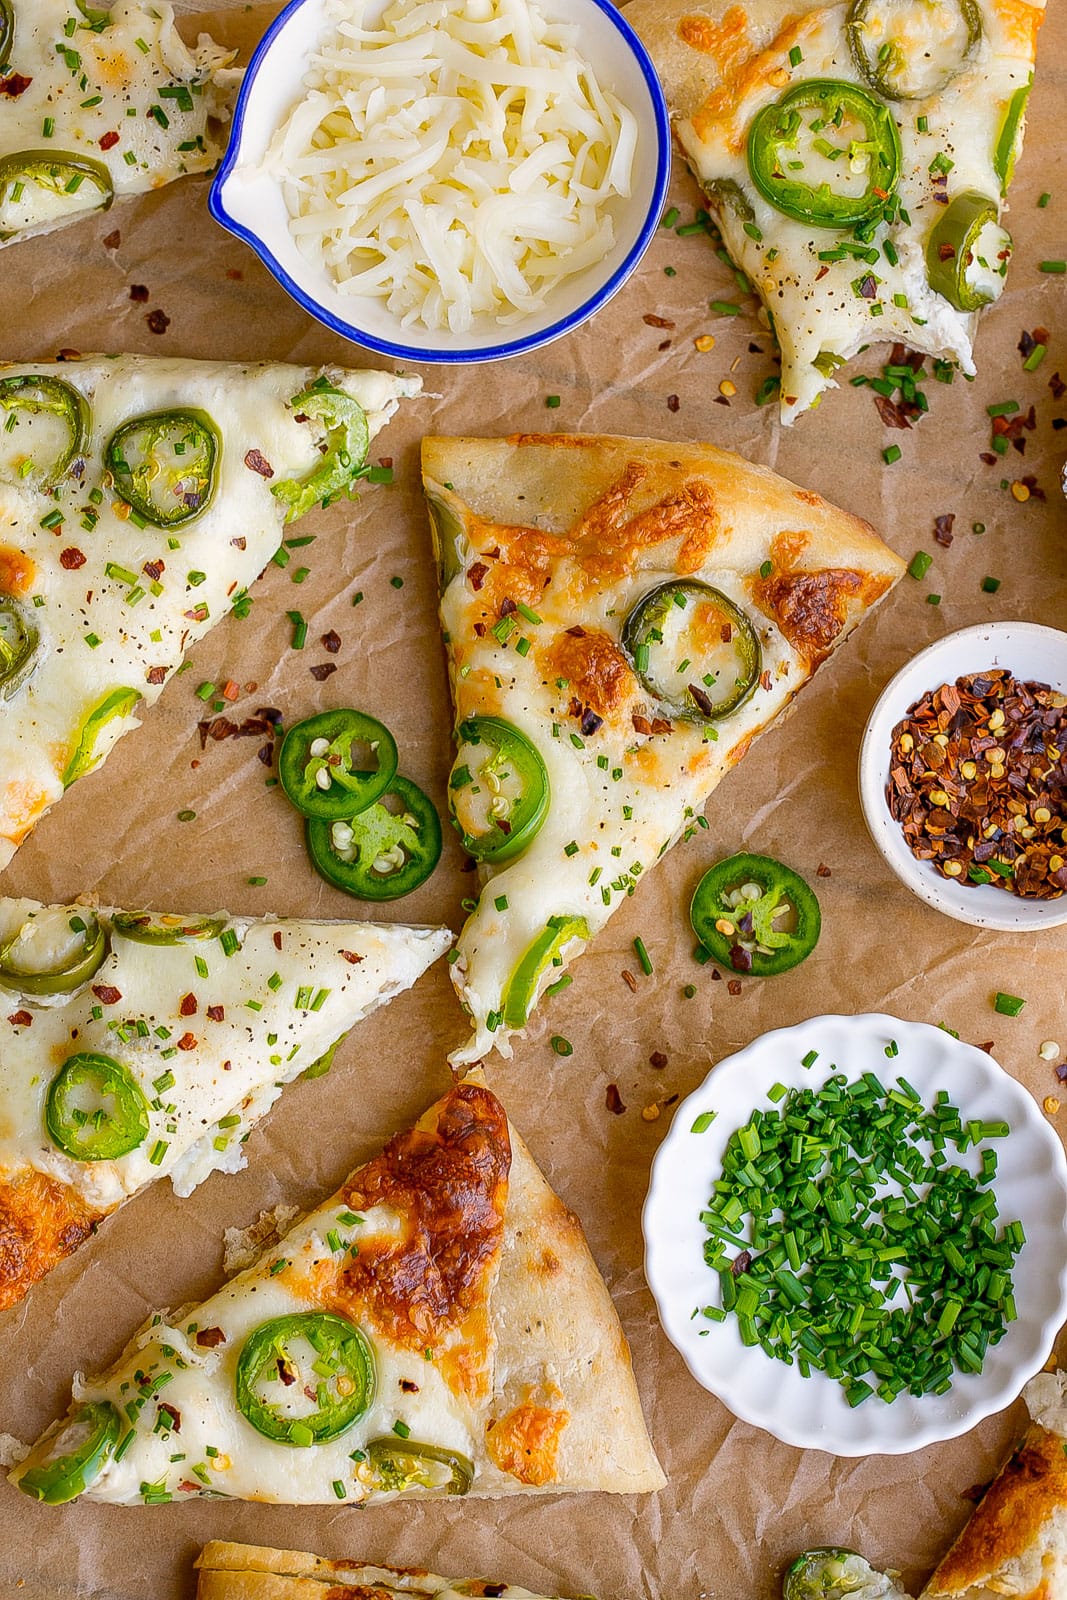 Pizza slices with jalapeños.